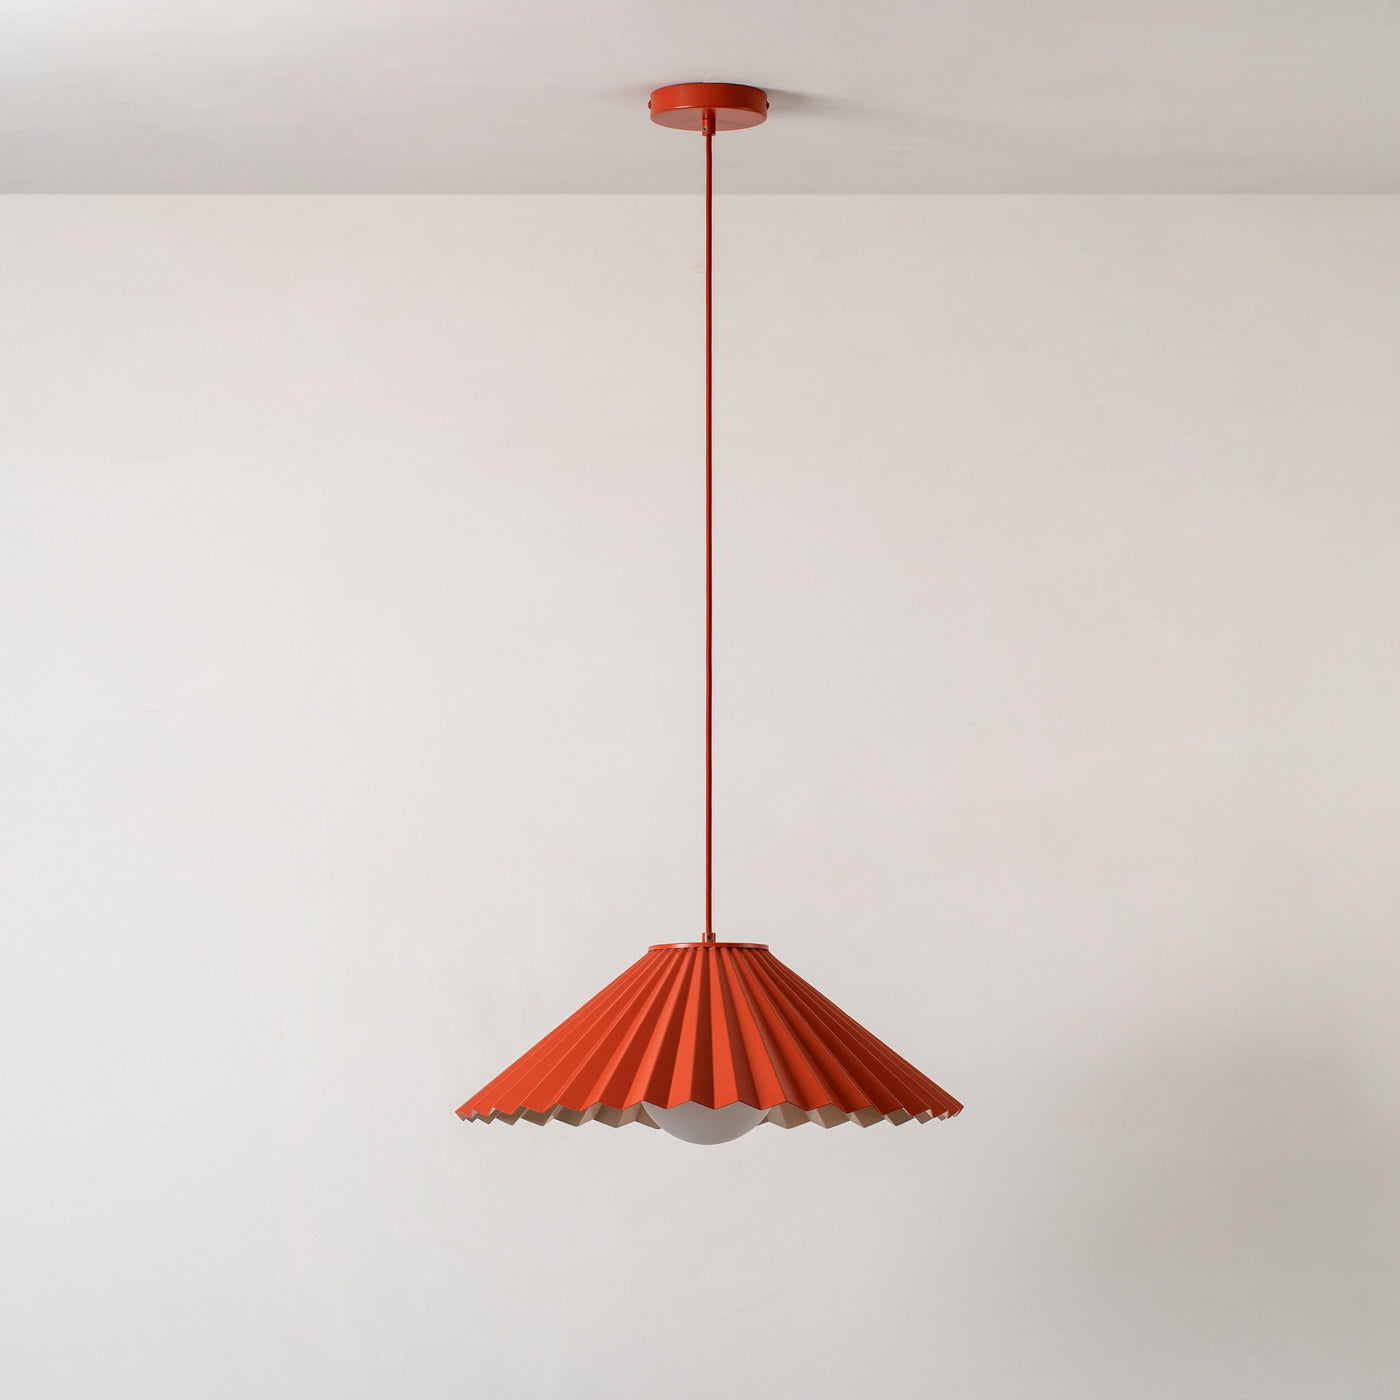 Houseof Pleat Pendant Ceiling Light designed by Emma Gurner. Available from someday designs.